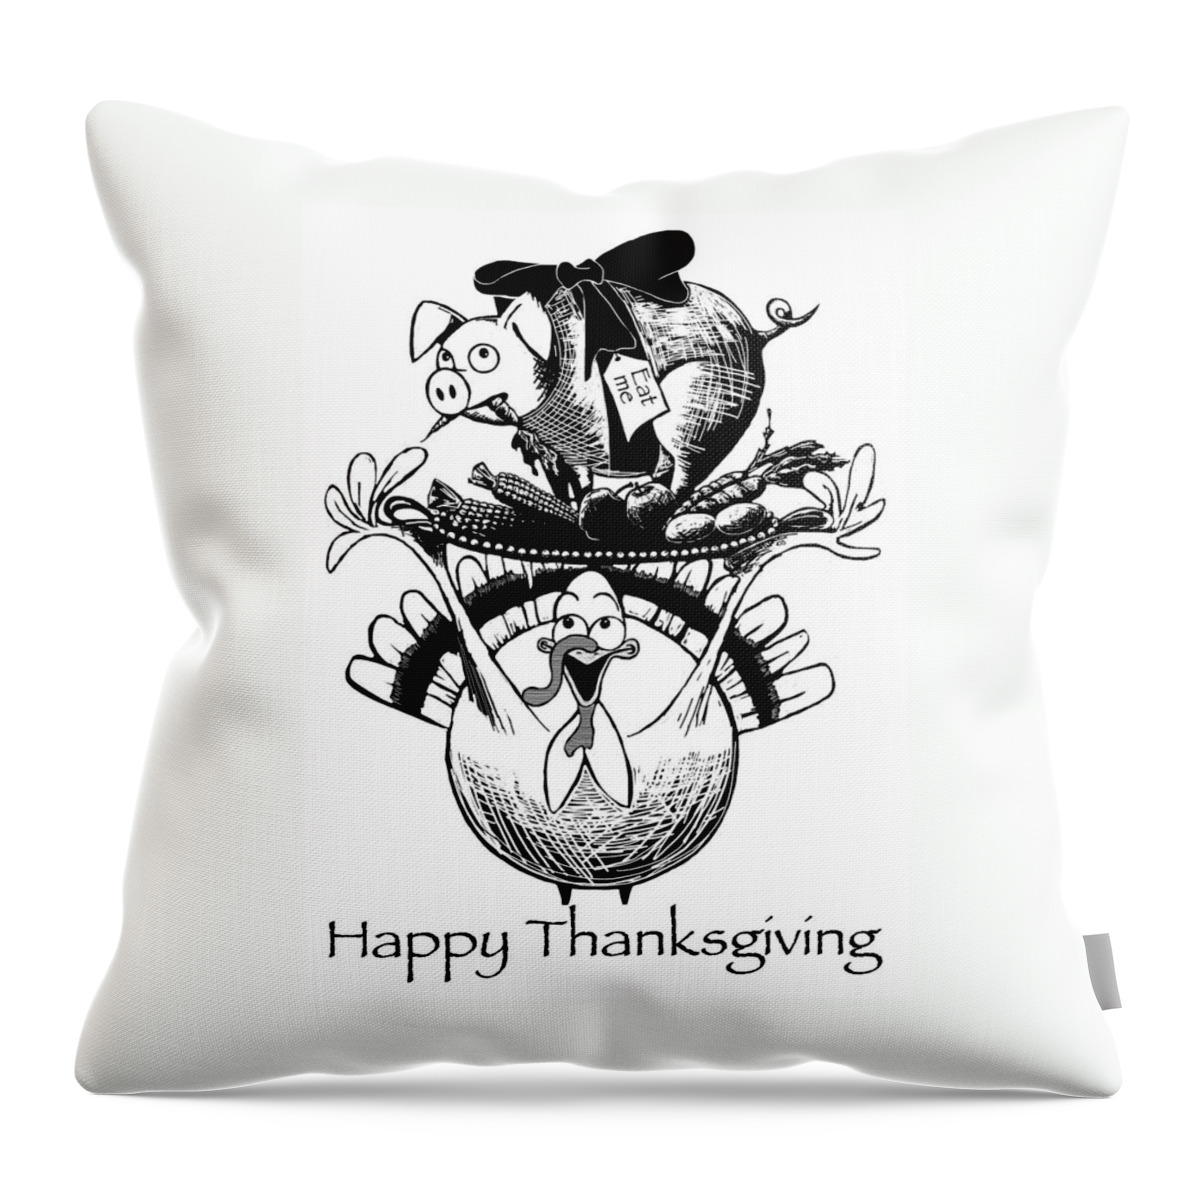 Thanksgiving Throw Pillow featuring the digital art Happy Thanksgiving by Konni Jensen